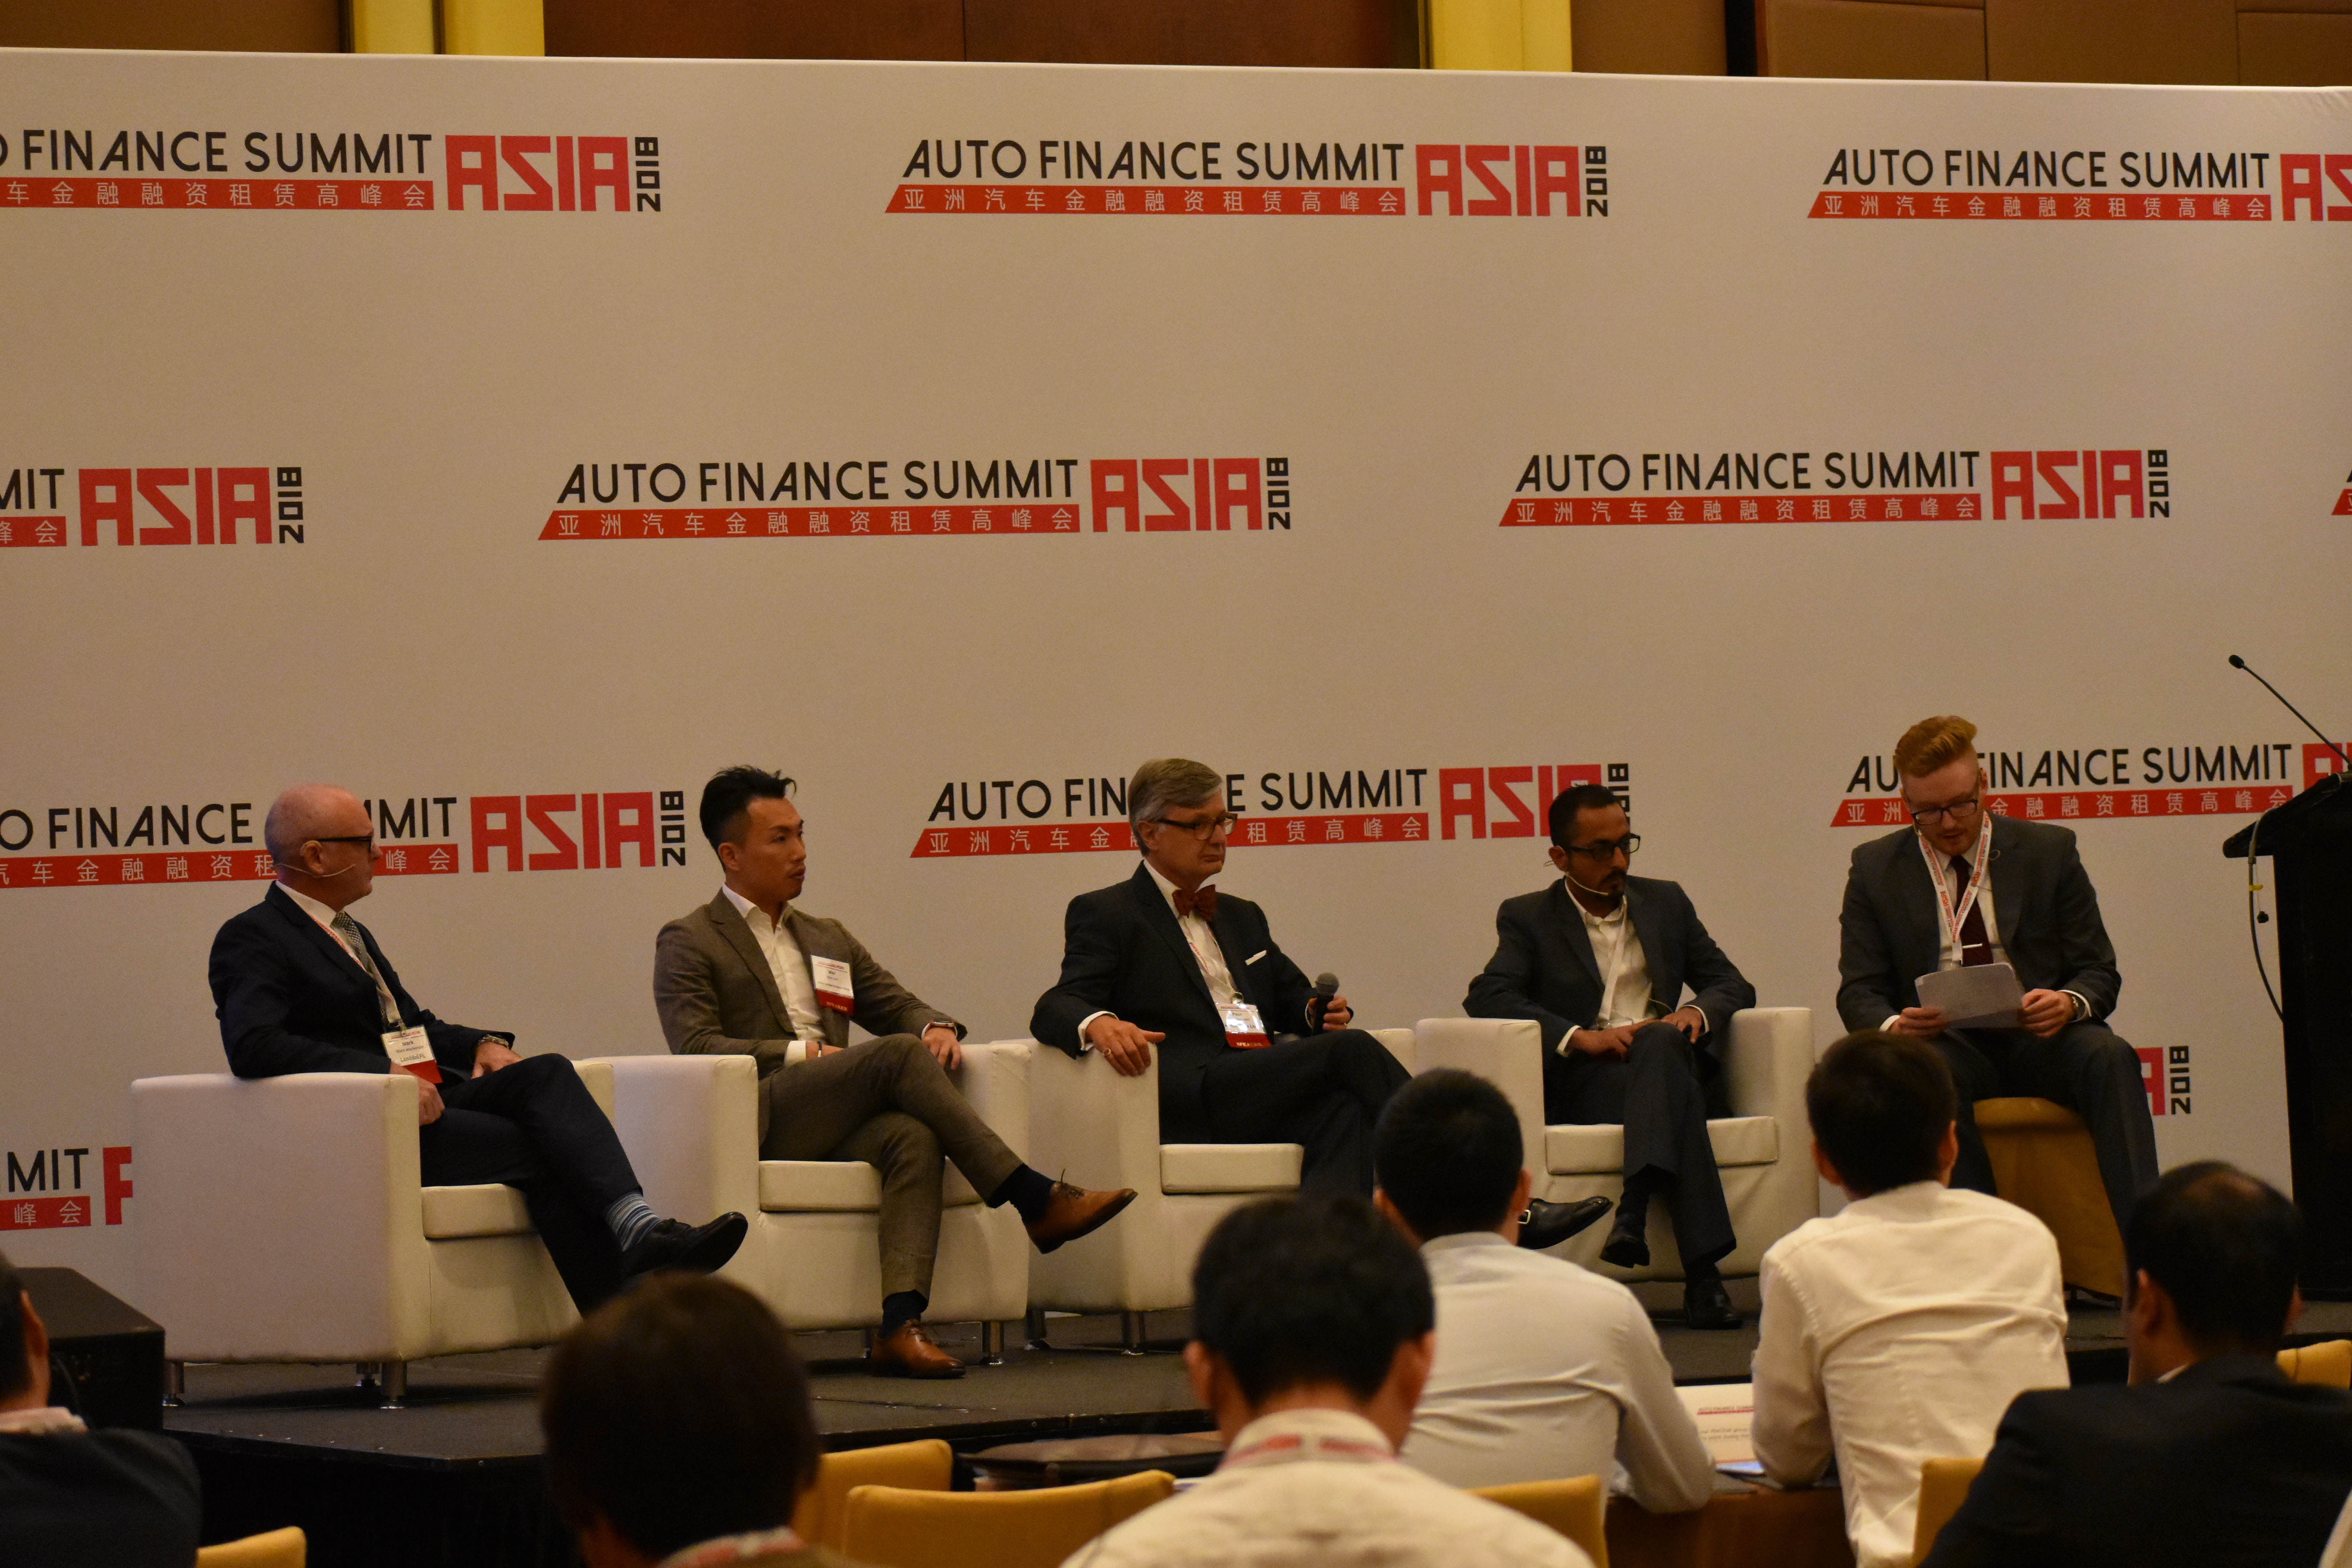 Panelists discuss new technologies at the Auto Finance Summit Asia.